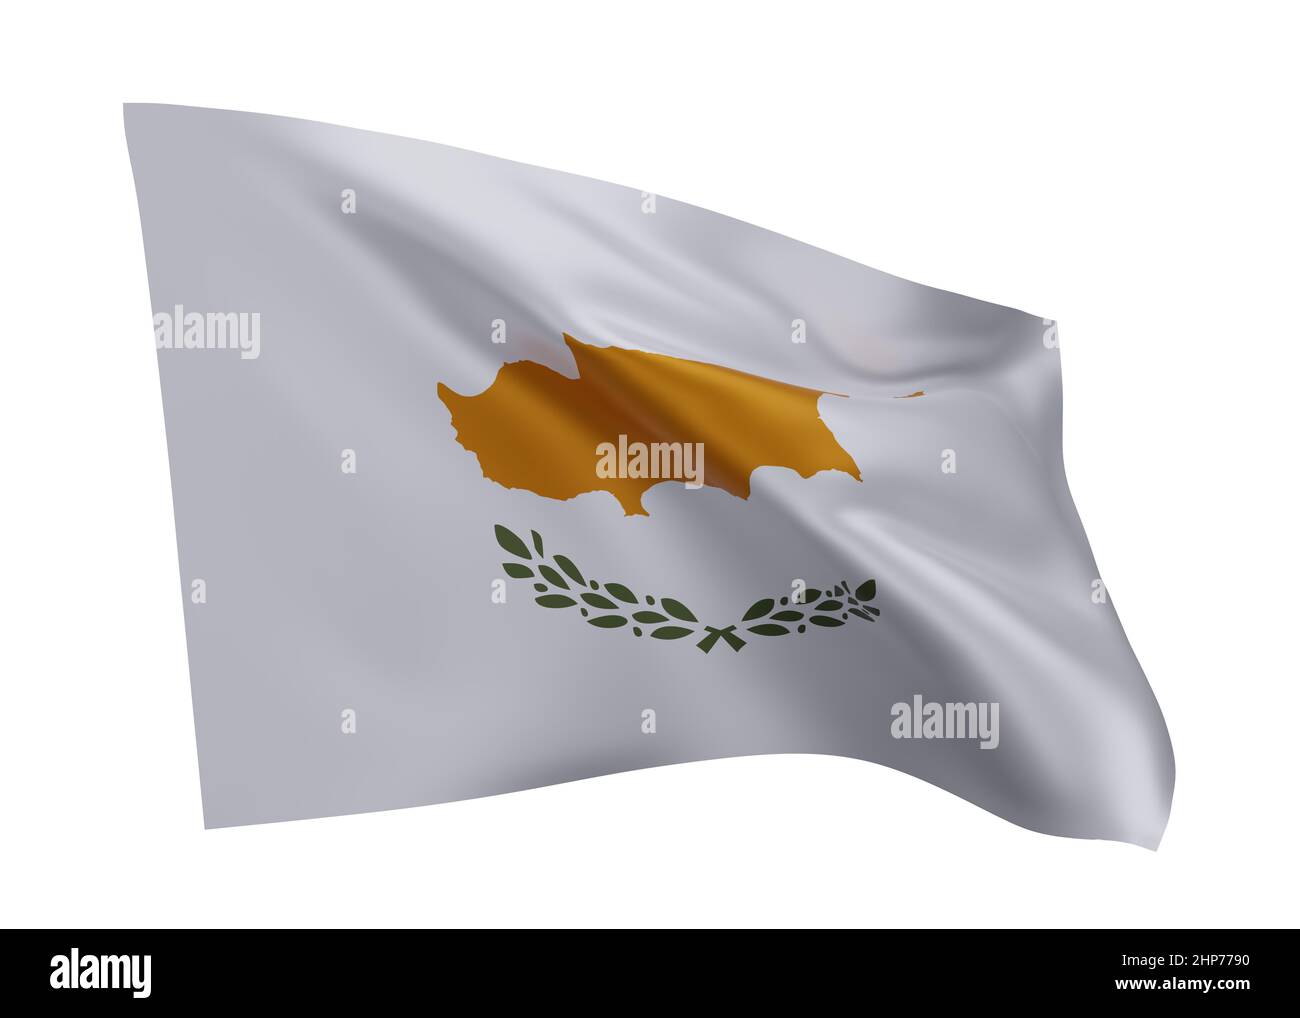 3d illustration flag of Cyprus. Cyprus high resolution flag isolated against white background. 3d rendering Stock Photo